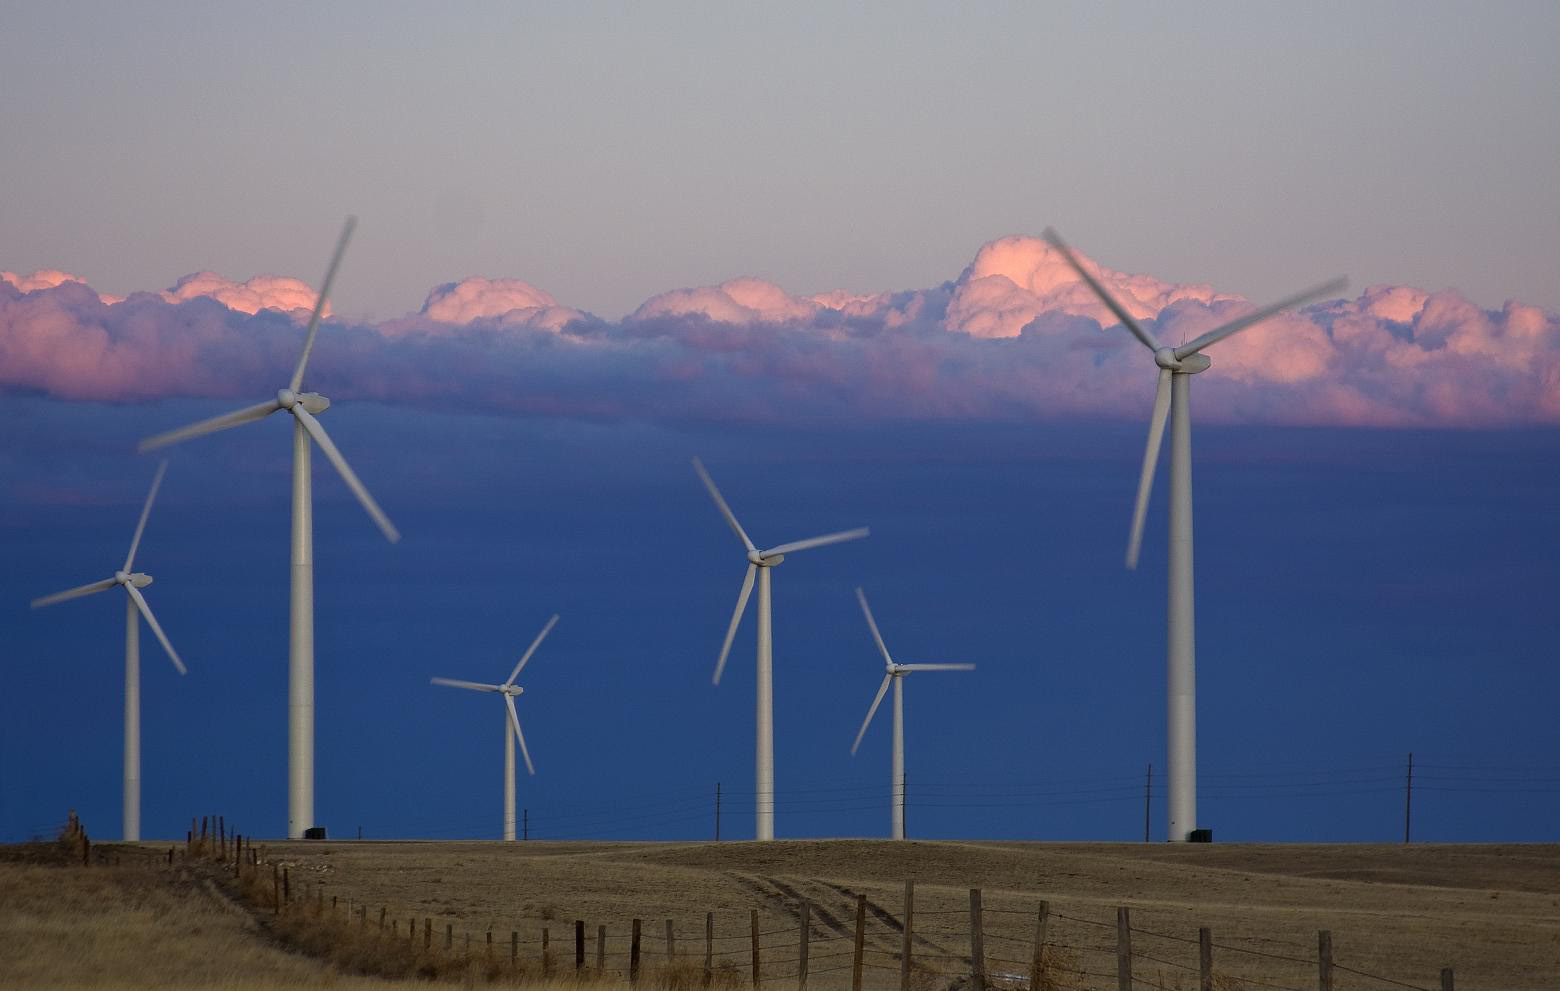 The Cedar Creek wind farm east of Grover, Colorado includes more than 200 turbines and generates roughly 300 megawatts of energy. 